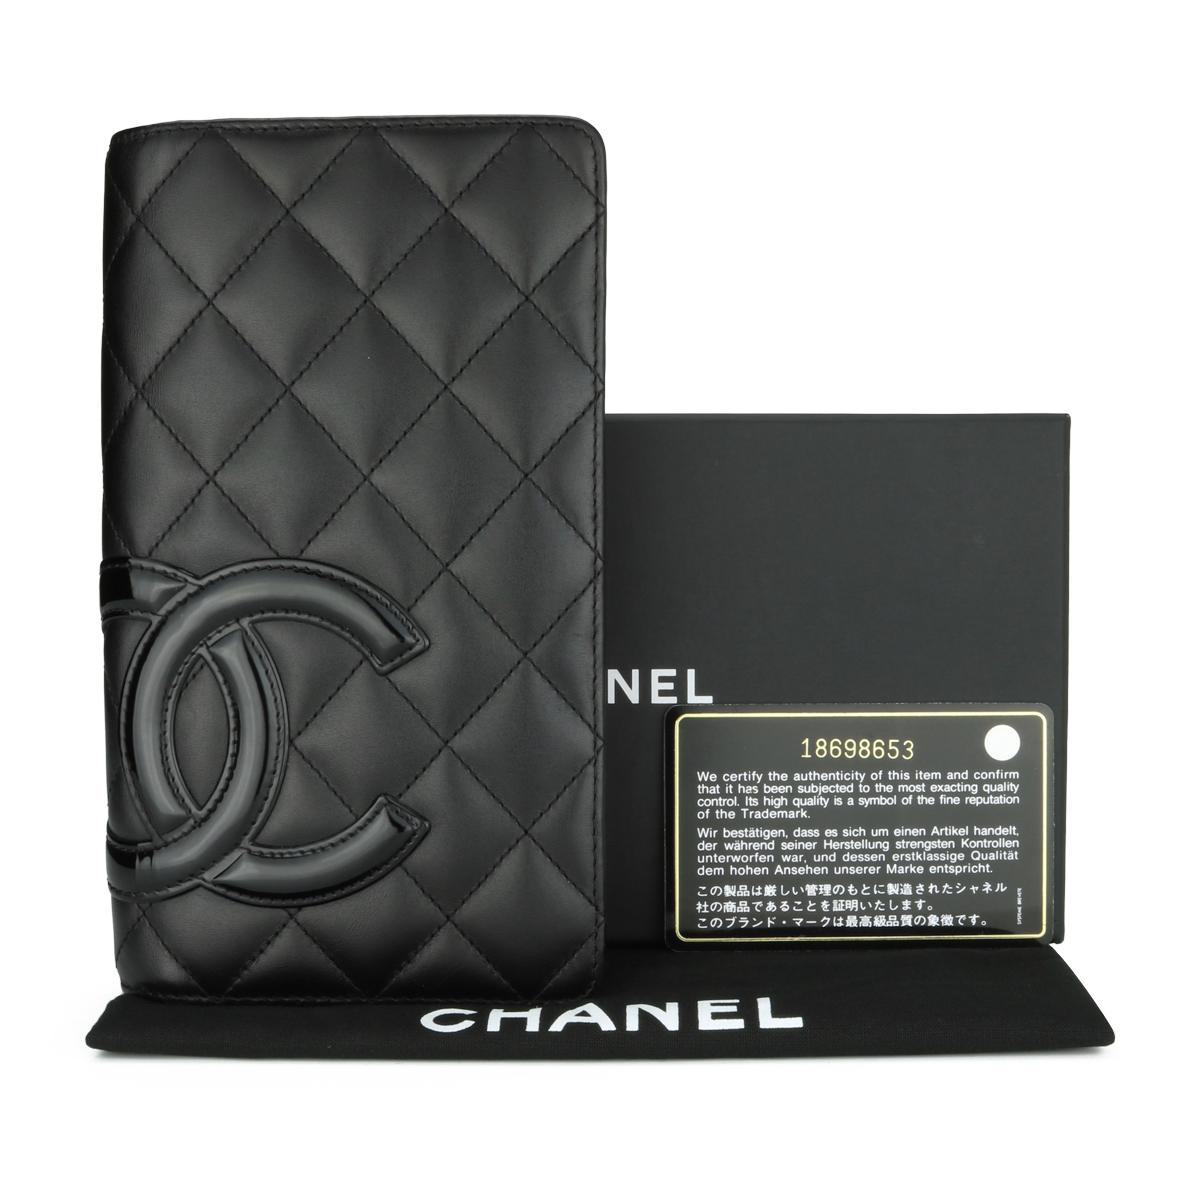 Chanel Quilted Cambon Long Flap Wallet Black Calfskin with Silver Hardware 2014.

This stunning Cambon wallet is in very good condition, the wallet still holds its original shape, and the hardware is still very shiny.

- Exterior Condition: Very